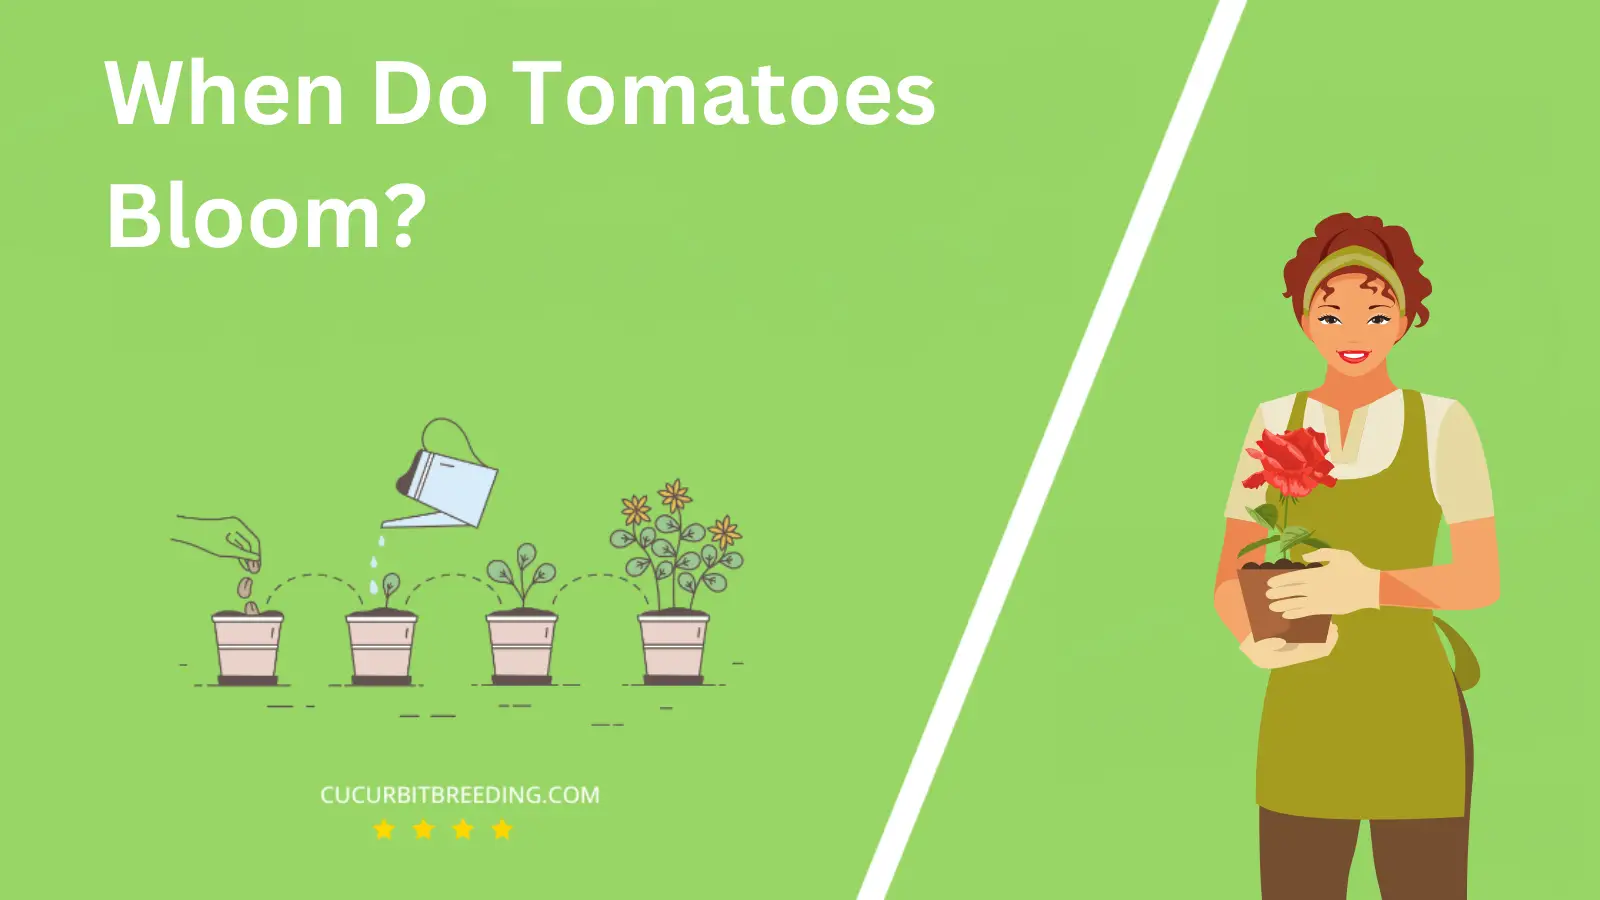 When Do Tomatoes Bloom?